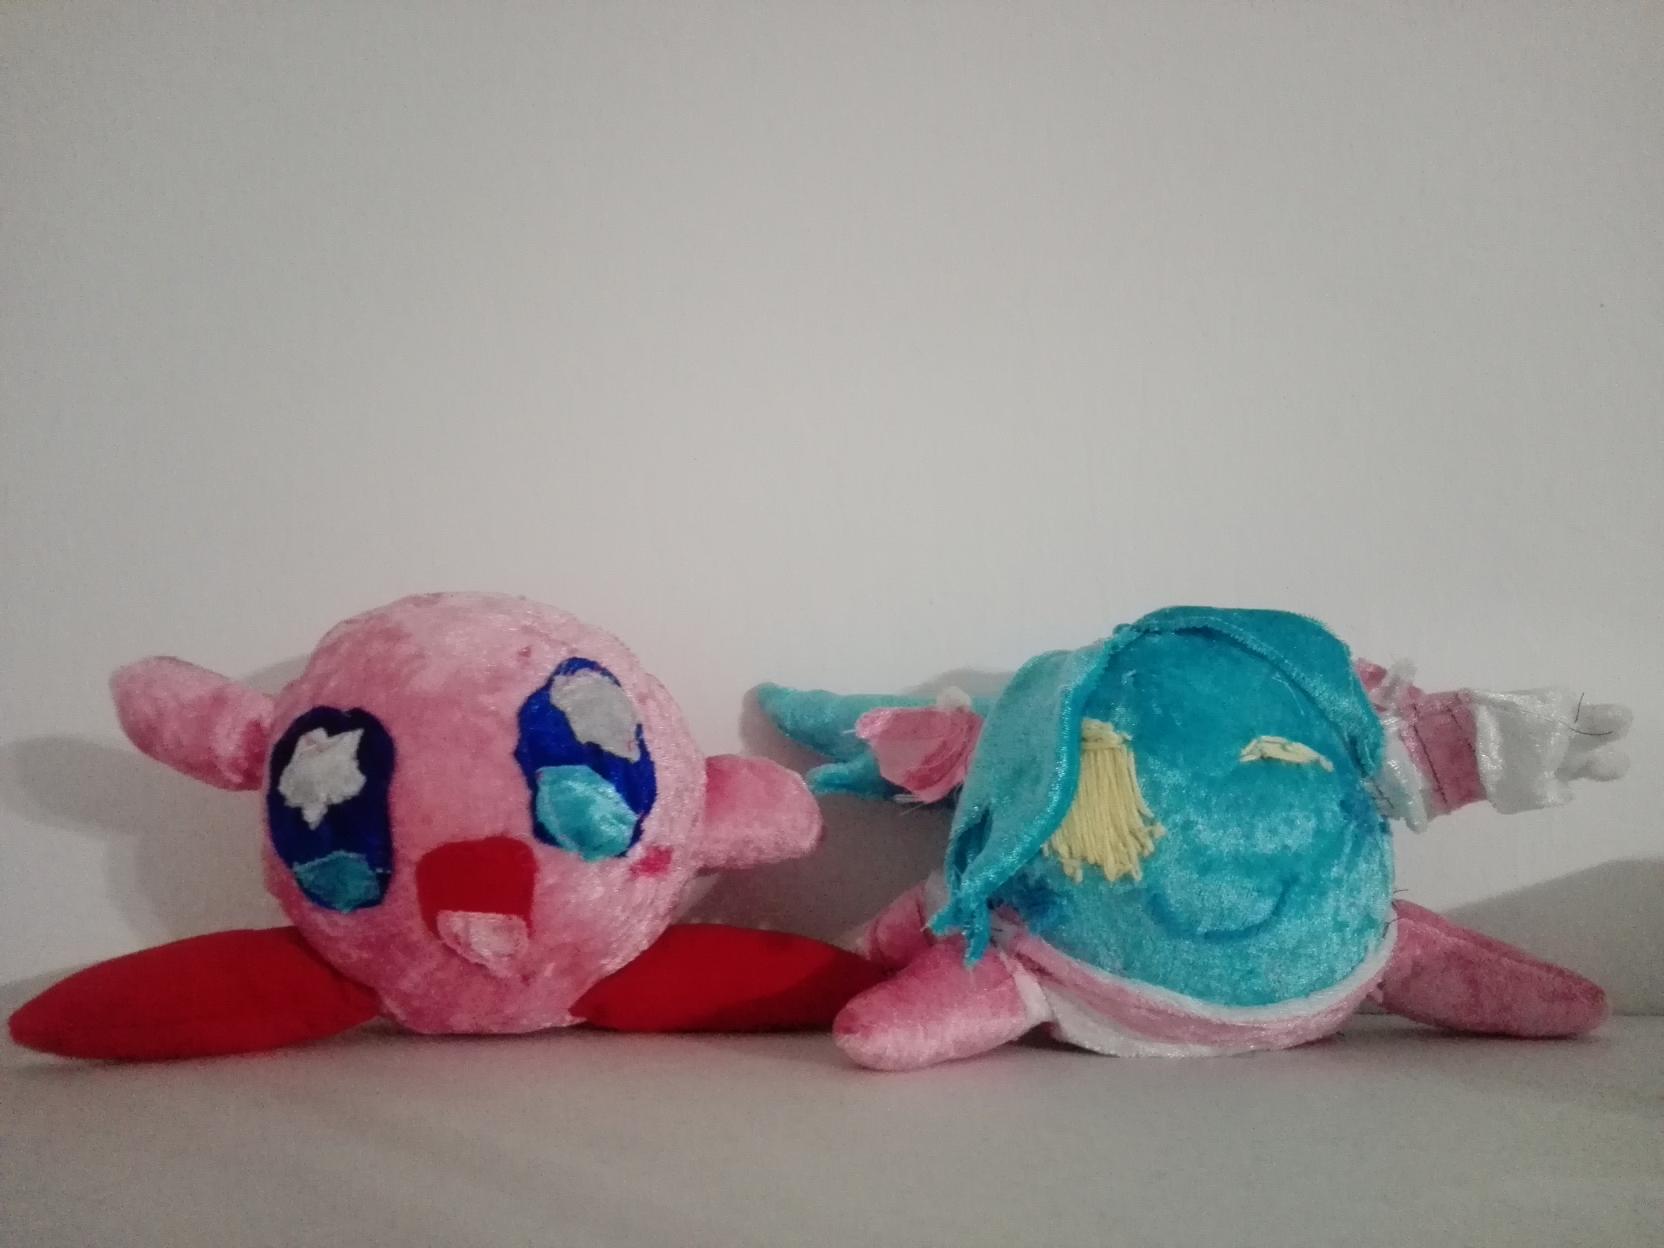 Plushies of Kirby and an outdated design of Rainberry, my Kirbysona and the site's mascot